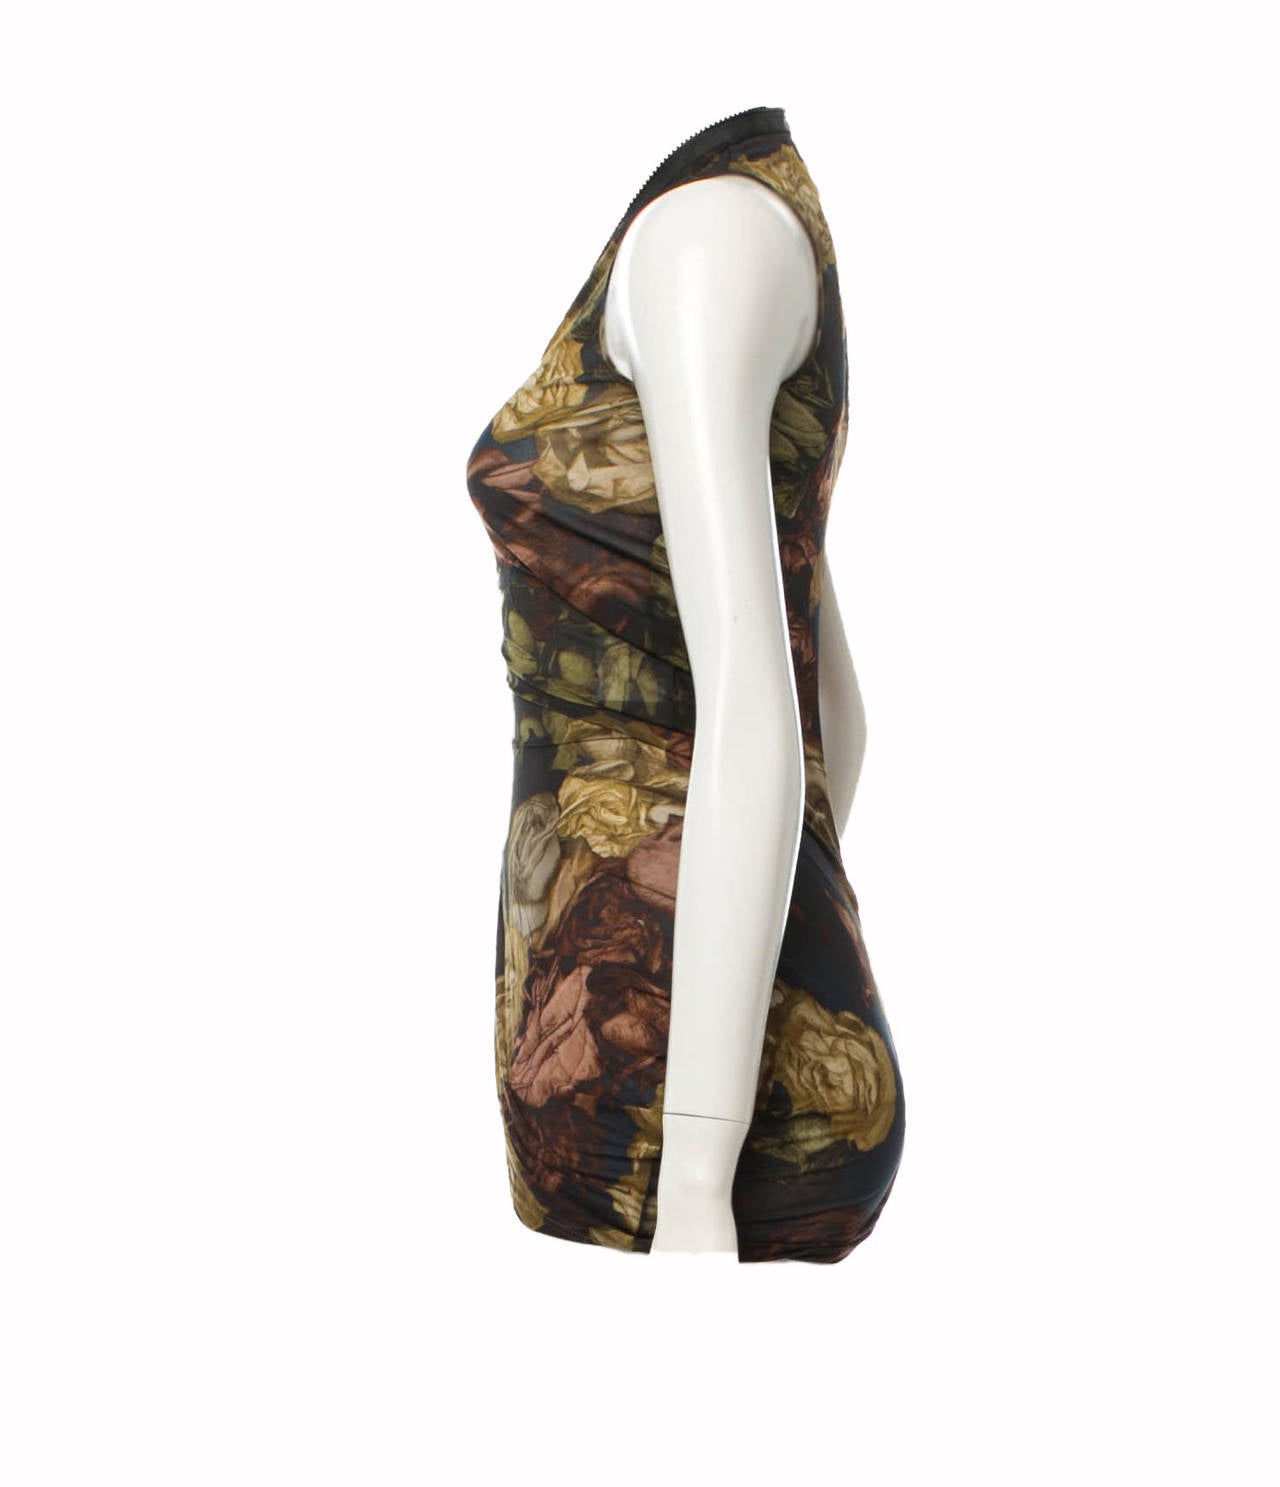 Alexander McQueen floral silk sleeveless blouse from his Spring Summer 2010 Plato's Atlantis Collection. The  blouse features a front zippered closure.

Bust 28”, Waist 22”, Length 30”

100% Cupro